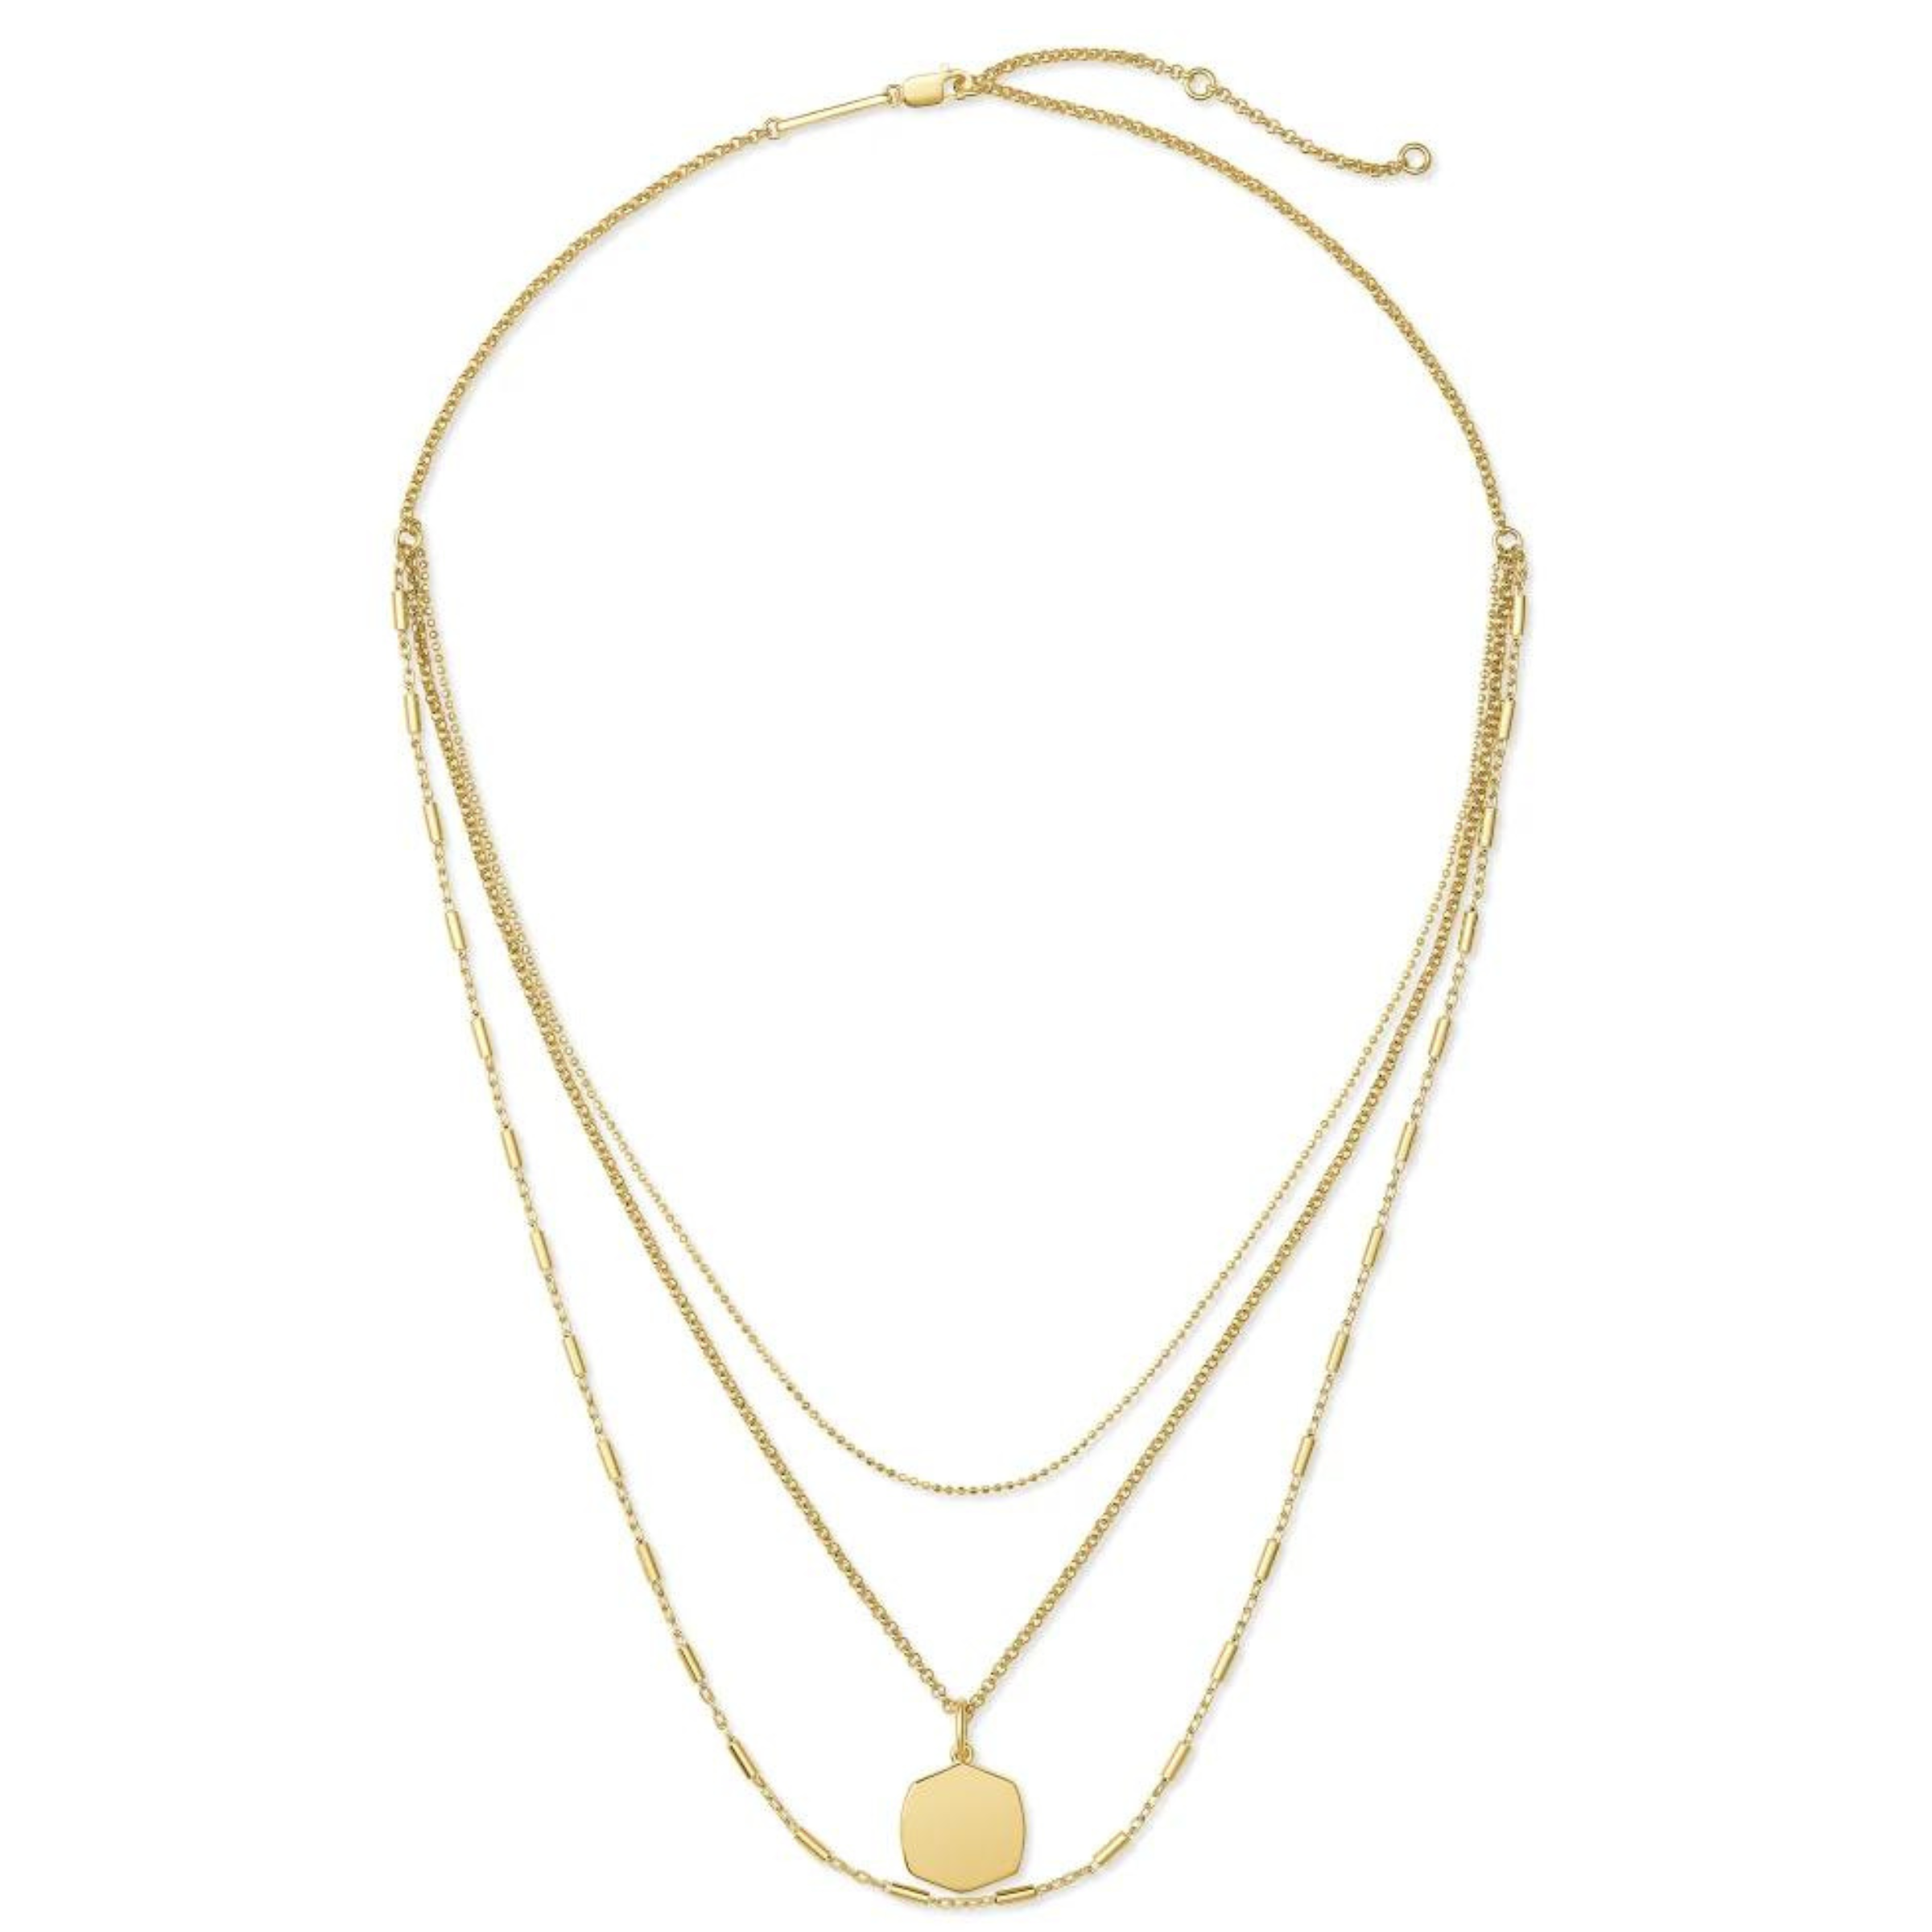 Kendra Scott | Davis Triple Strand Necklace in 18k Yellow Gold Vermeil - Giddy Up Glamour Boutique